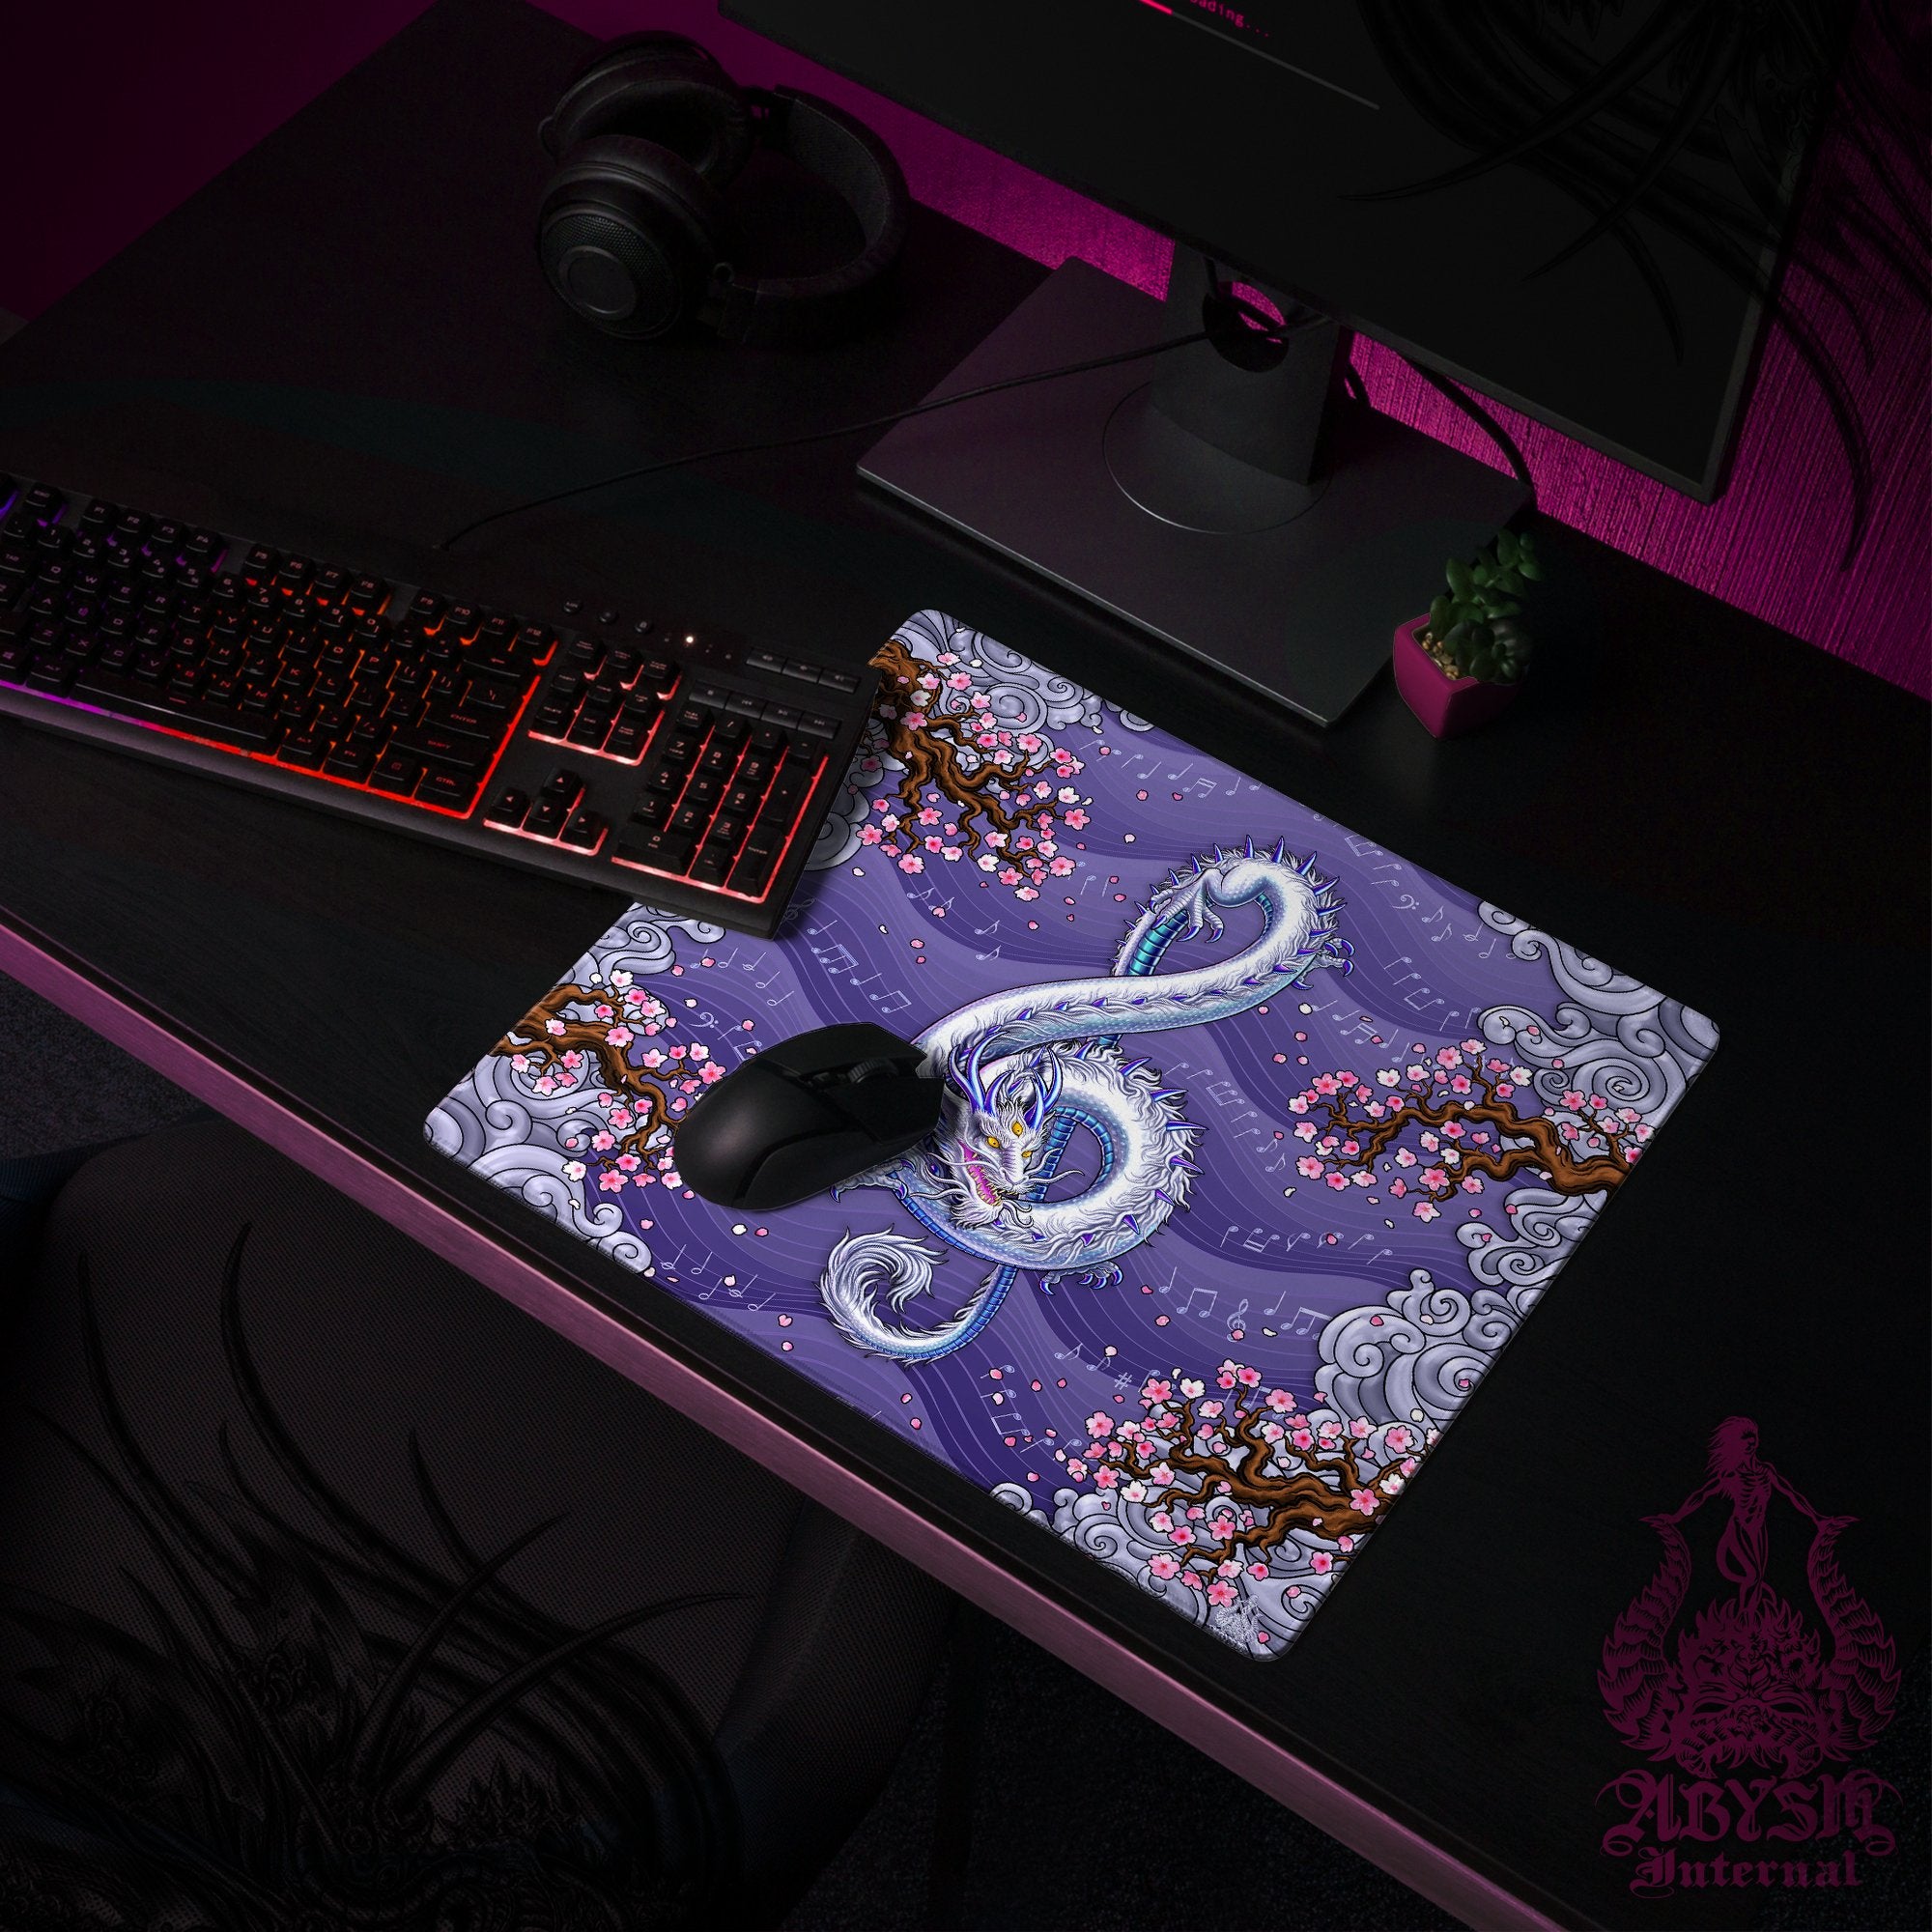 Music Gaming Desk Mat, Dragon Mouse Pad, Asian Table Protector Cover, Chinese Art Workpad, Treble Clef Print - Purple, Gold, Blue, 3 Colors - Abysm Internal